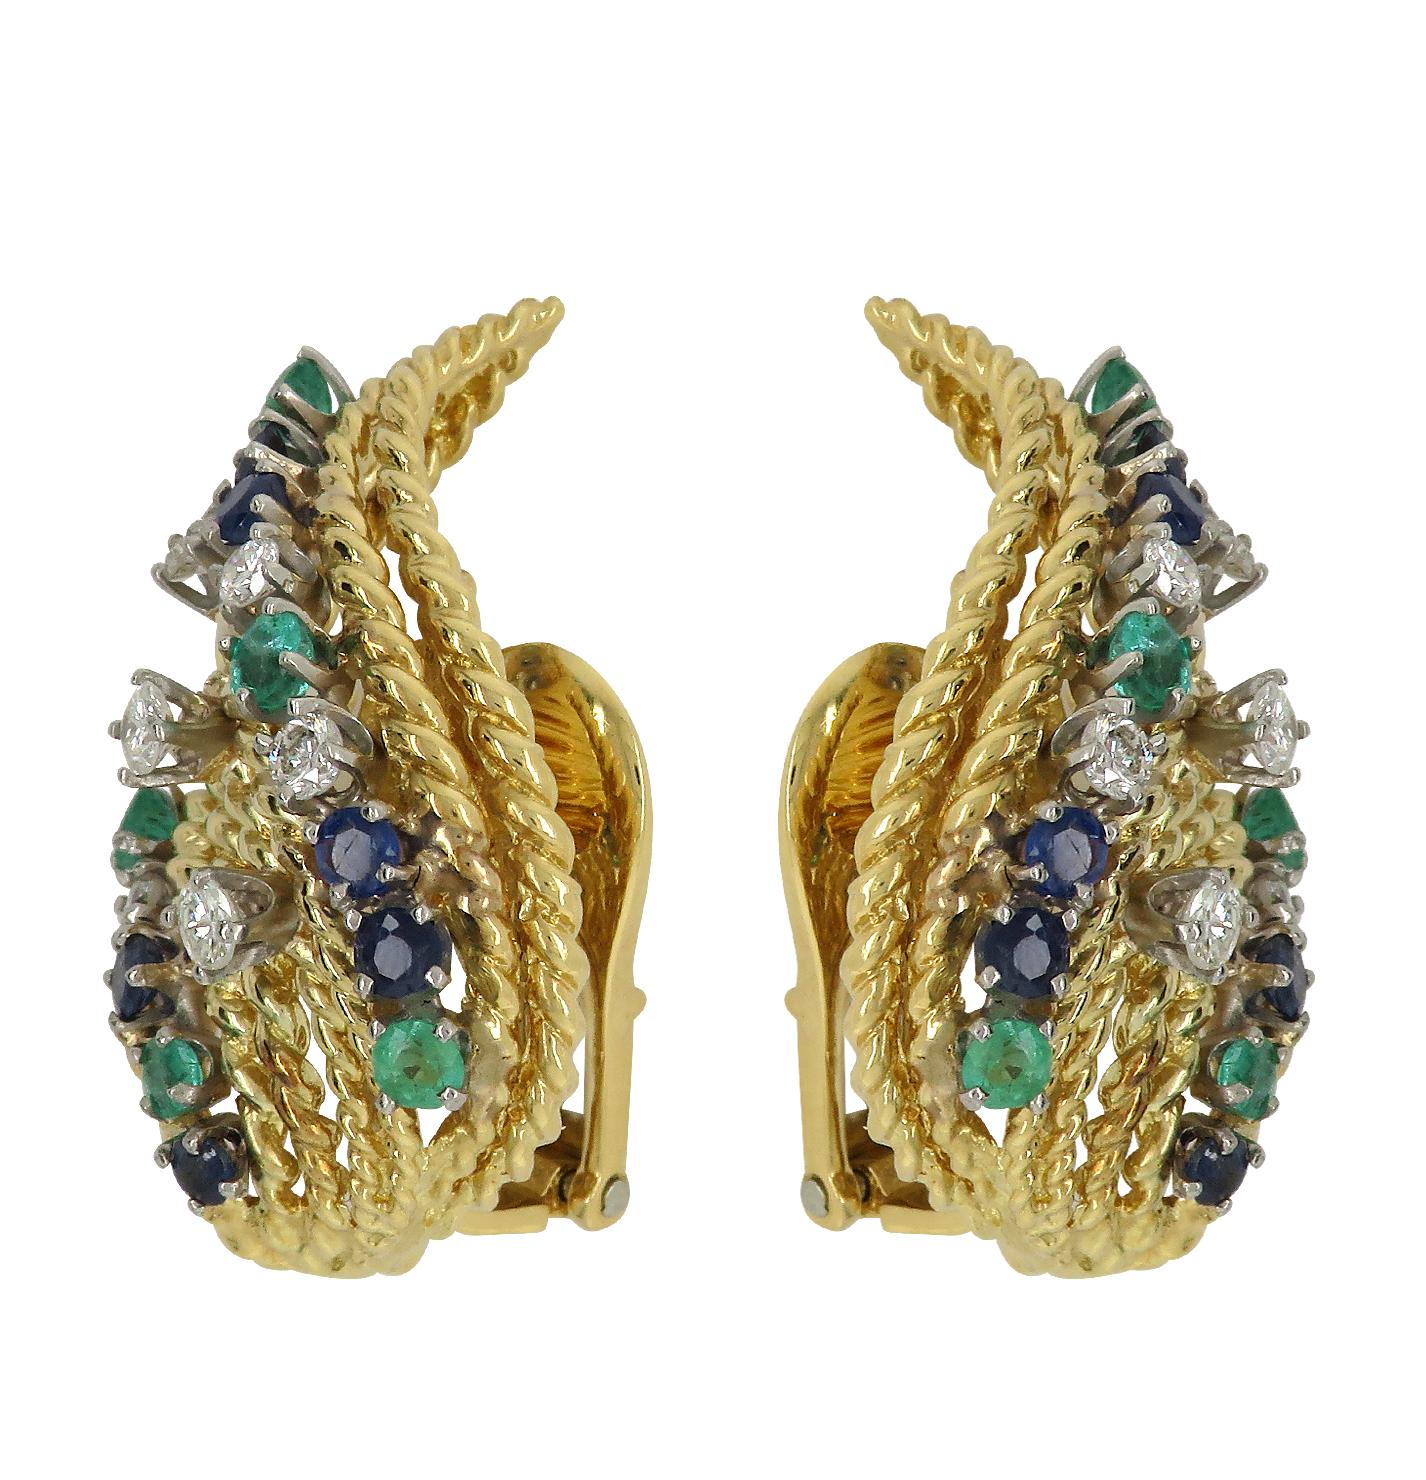 Enchanting David Webb clip-on earrings crafted in 18 karat yellow and white gold, featuring twisted gold strands detailed with emeralds, sapphires and diamonds. The strands leap up the ear in an elegant display of rich color and texture. The